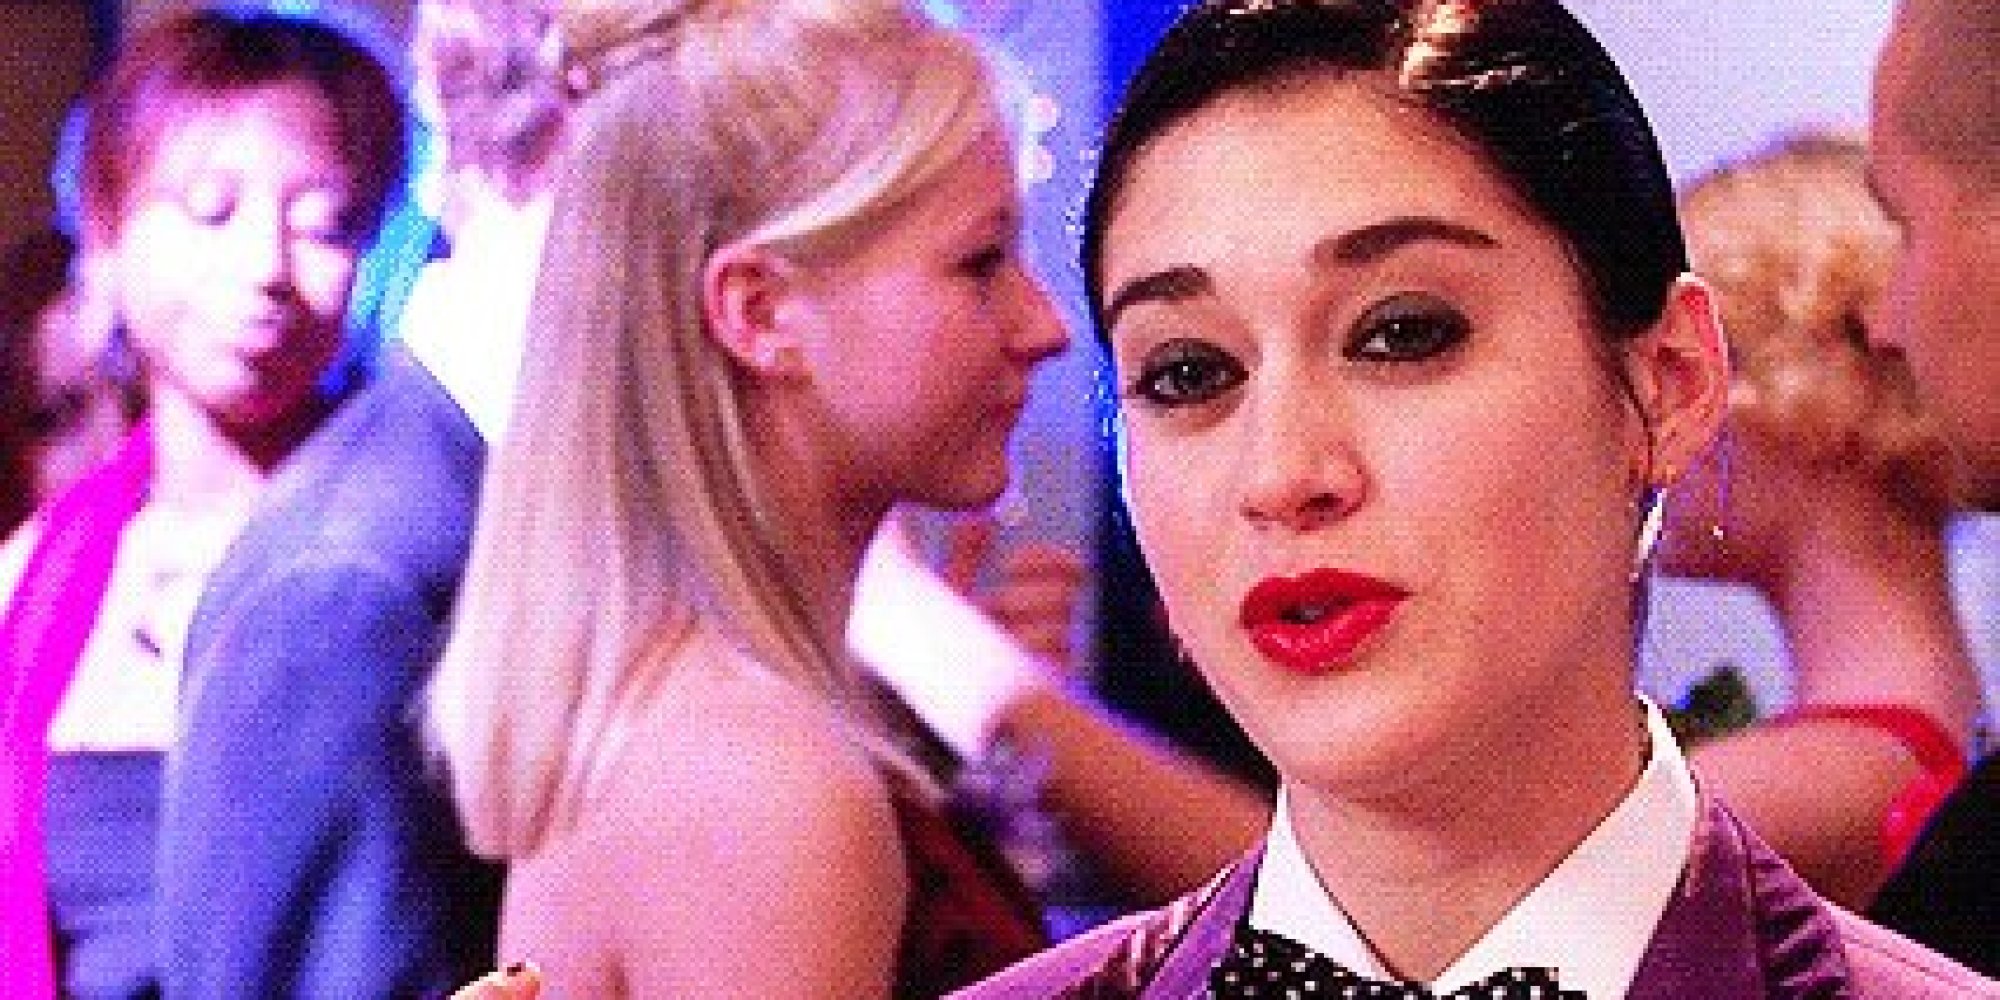 Its The 10th Anniversary Of Mean Girls And Its About Time Janis Ian Got Some Respect Huffpost